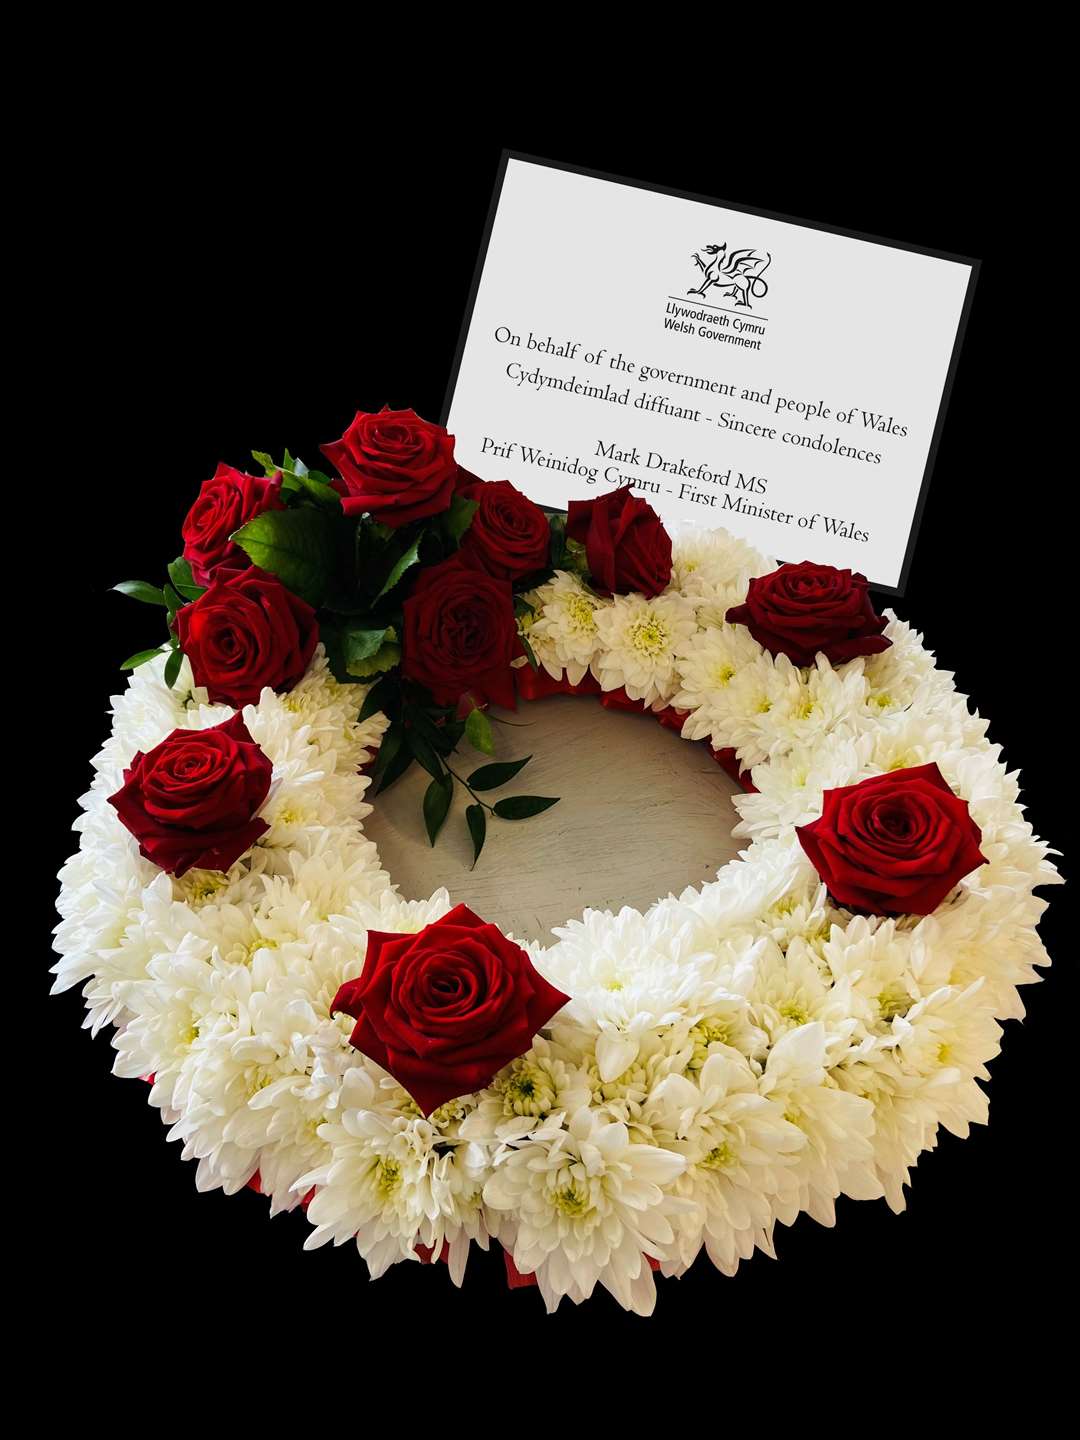 A flower wreath sent by First Minister of Wales Mark Drakeford on behalf of the government and people of Wales (Welsh Government/PA)